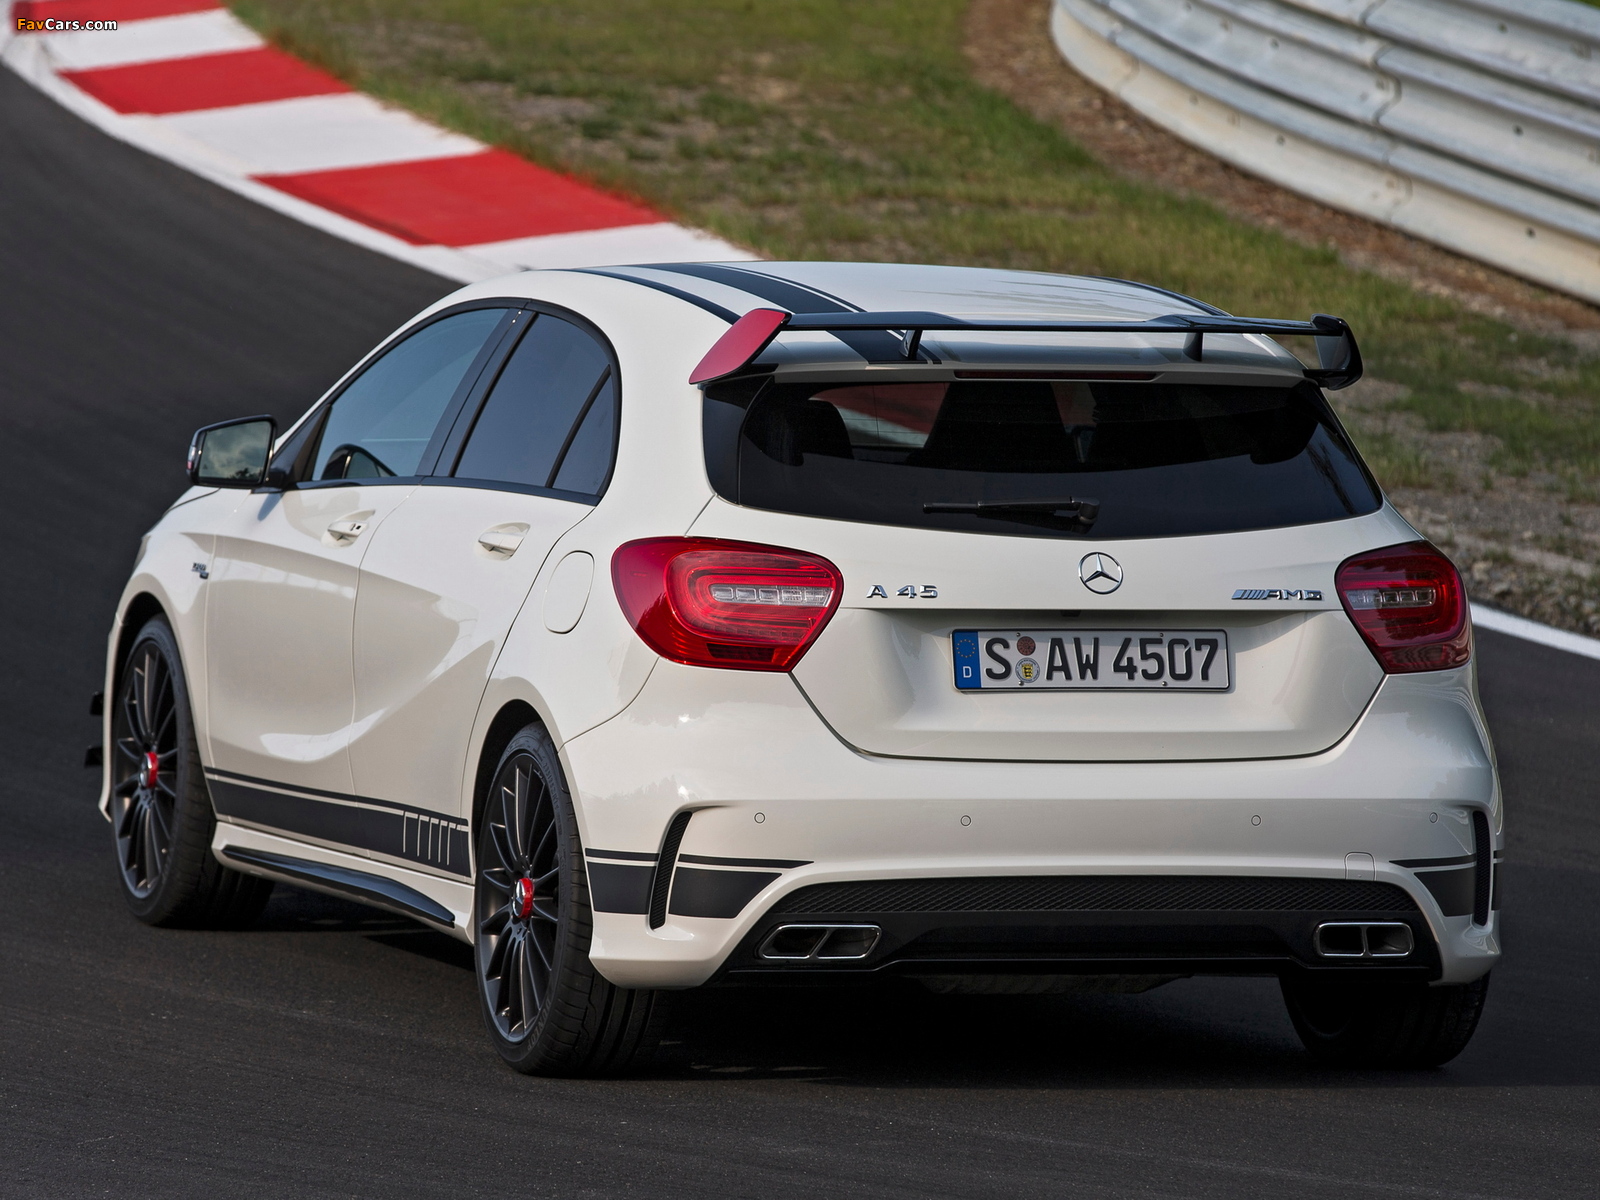 Mercedes-Benz A 45 AMG Edition 1 (W176) 2013 wallpapers (1600 x 1200)